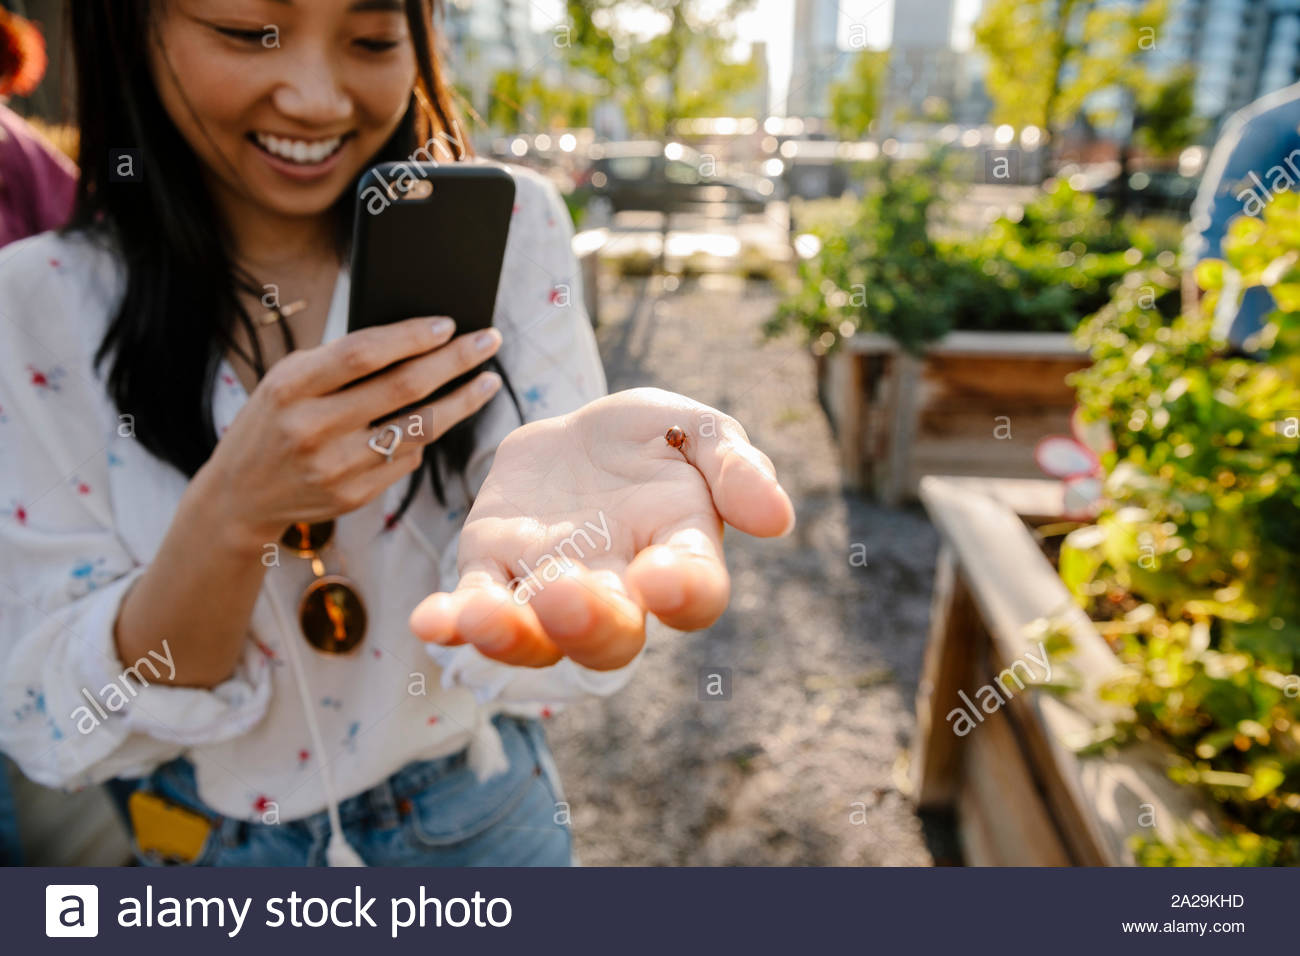 Young woman with camera phone photographing ladybug in community garden Stock Photo